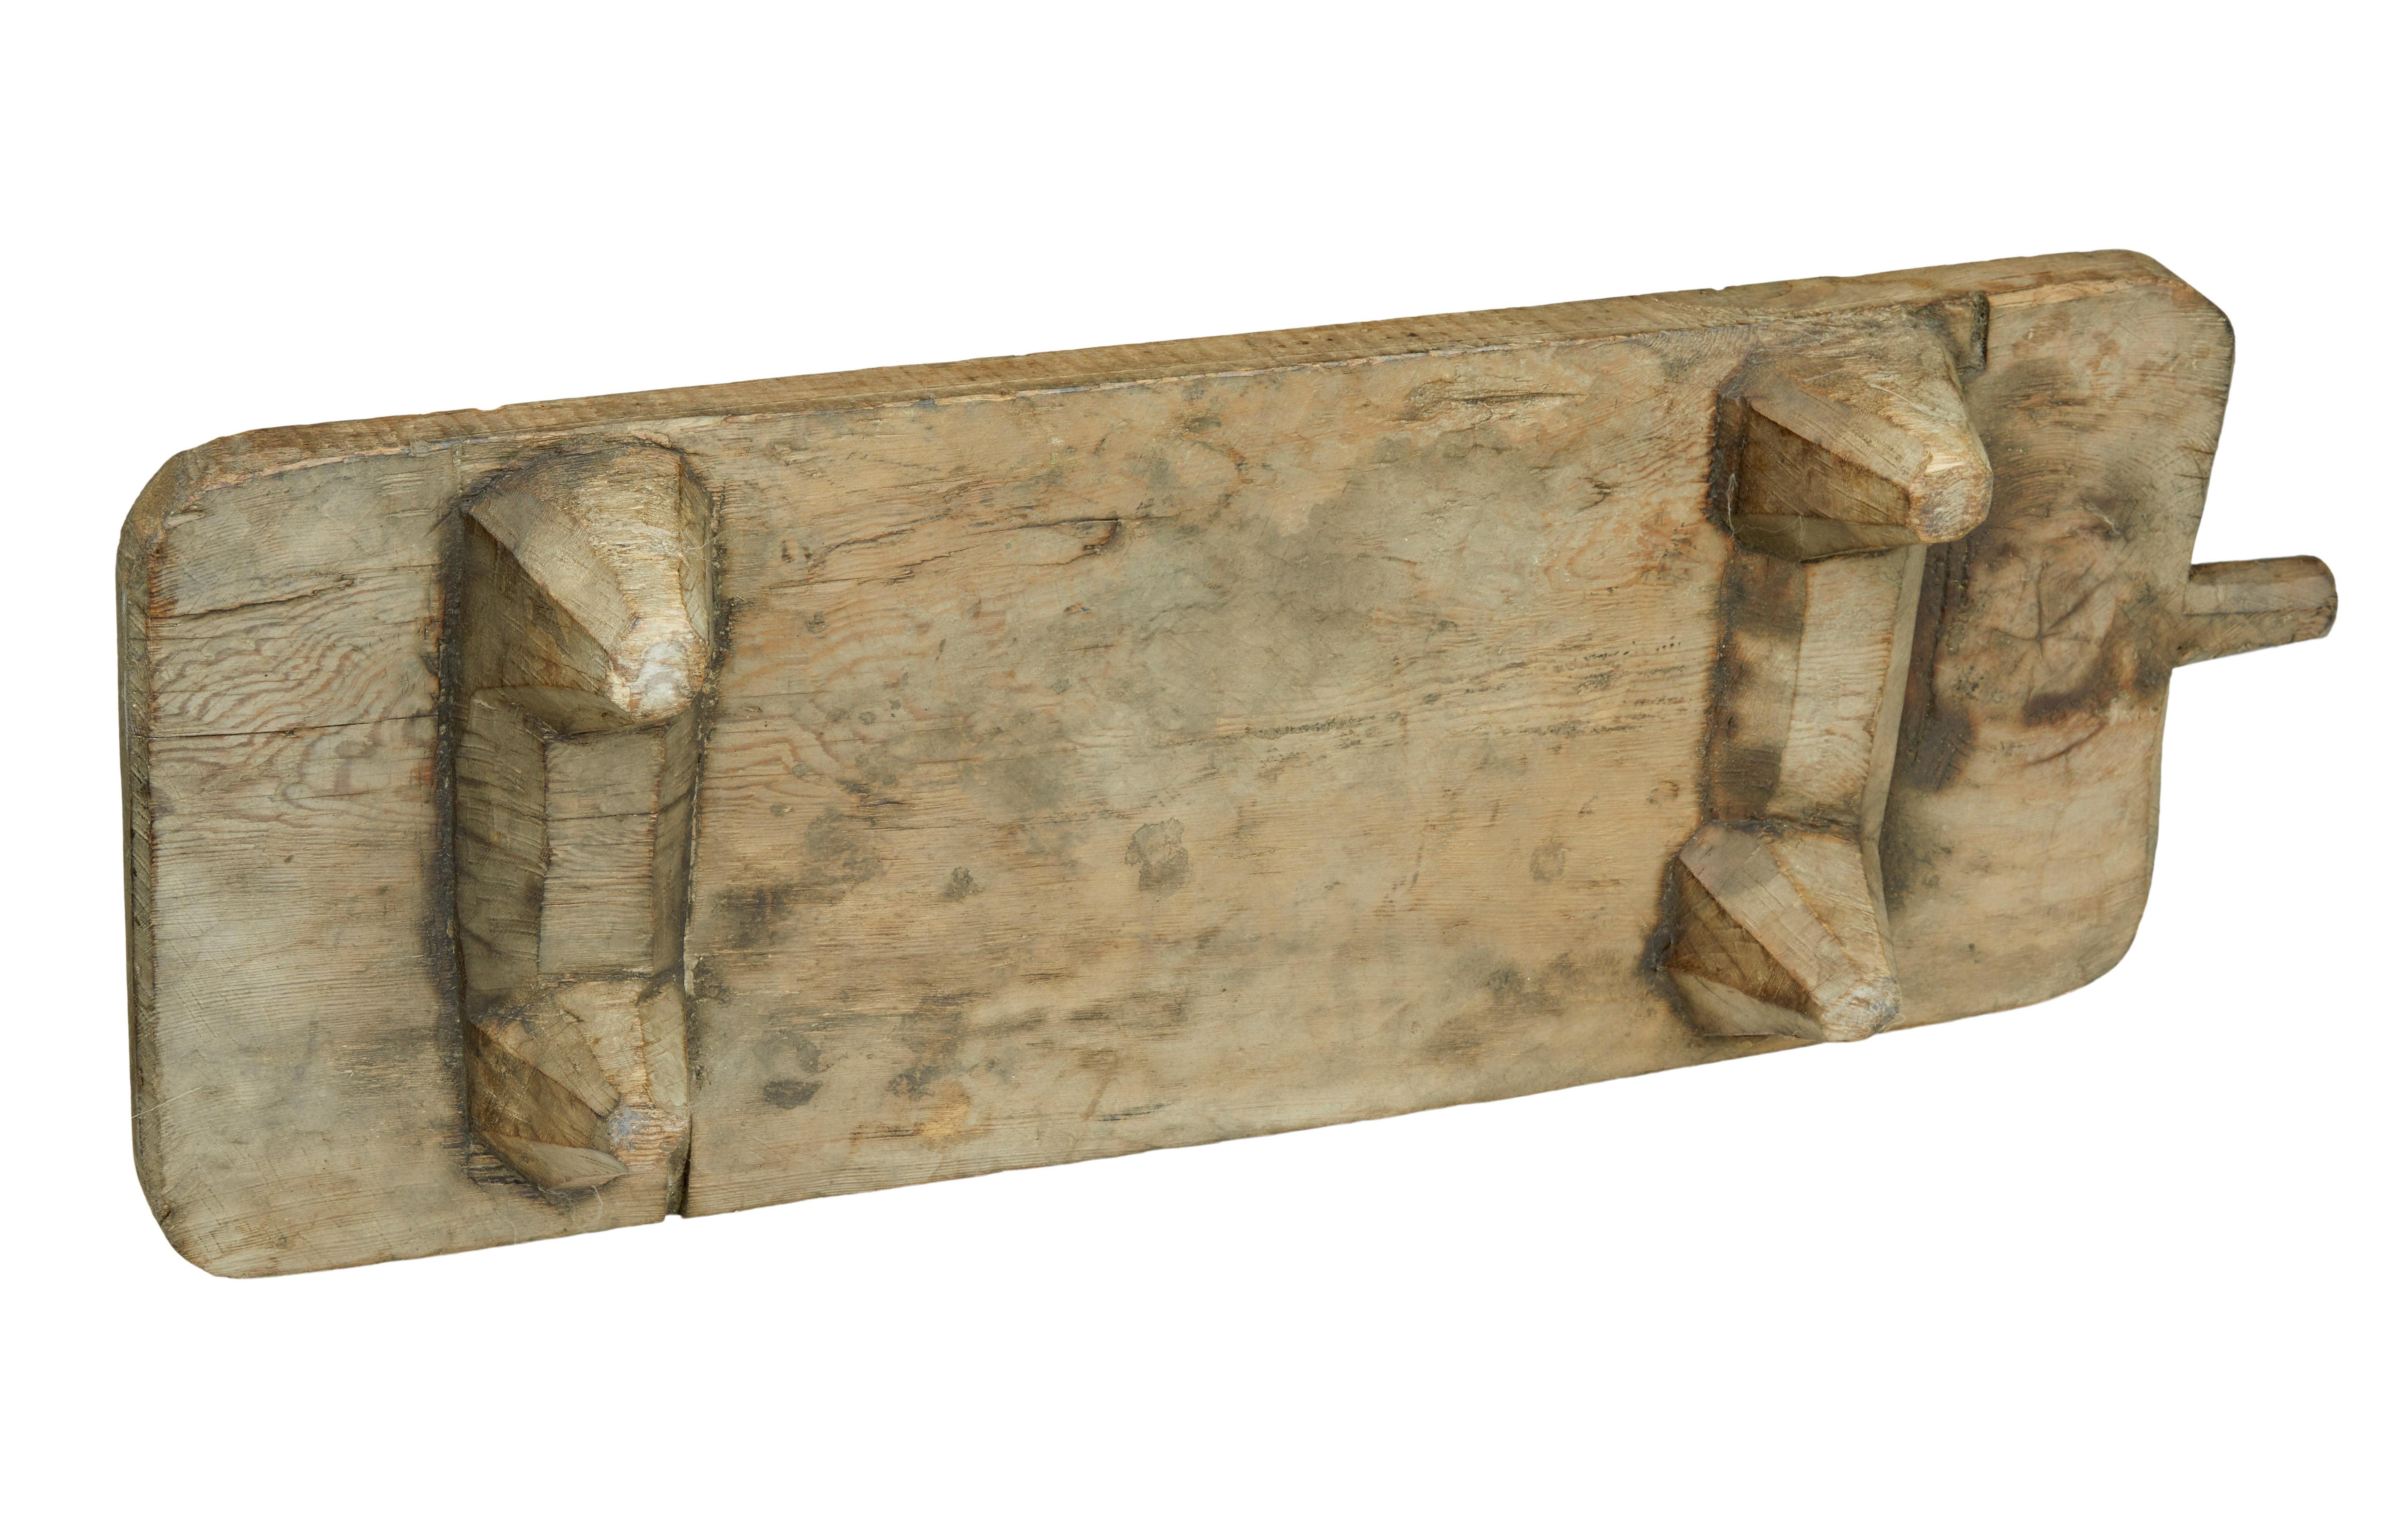 Unusual Scandinavian solid pine chopping / bread board, circa 1880.

Substantial piece of pine with the feet hand carved from the solid. Top has taken on a desirable patina with 1 handle at the end.

Ideal for a display piece or table server or